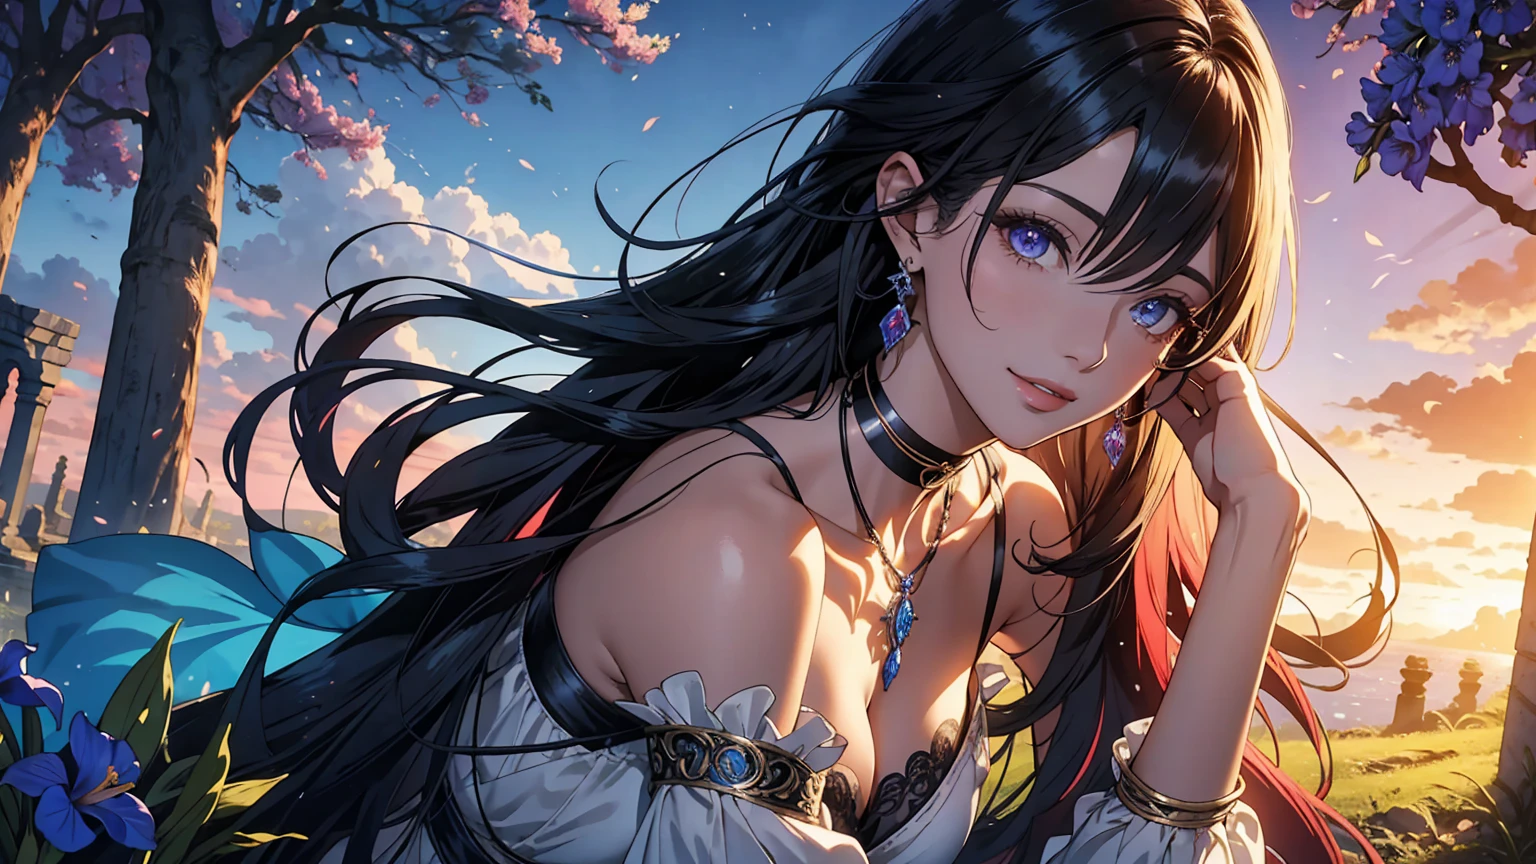 Arte de anime Genshin Impact: Woman in a setting of ancient ruins and a giant tree in the background and sunset. romantic era. Deep and dramatic atmosphere, mixing fantasy and reality. She is adorned with necklace and choker. clear and sharp eyes: irises with vibrant and detailed colors, well-defined pupils, natural shine reflecting light, clear and distinct iris edges, long, well-shaped eyelashes, well-groomed eyebrows, fine lines around the eyes. flowing hair. Sweet and provocative look, charmer smile. playful expression, stylish make up, long blonde hair flowing in the wind, Eyes seductive, Glossy lips, pose sexy, smiling confidently and seductively. Bold and determined stance, dynamic pose, directly facing the viewer. posing for a professional photo shoot. very high quality image, with ultra-detailed and realistic details. Vibrant colors and ethereal lighting. imaginative landscapes, expansive horizon, dramatic lighting. bright and vibrant colors, studio lighting, shallow depth of field, highlighting the main topic, soft natural lighting, Creating a dreamlike and magical atmosphere. Nature beauty.